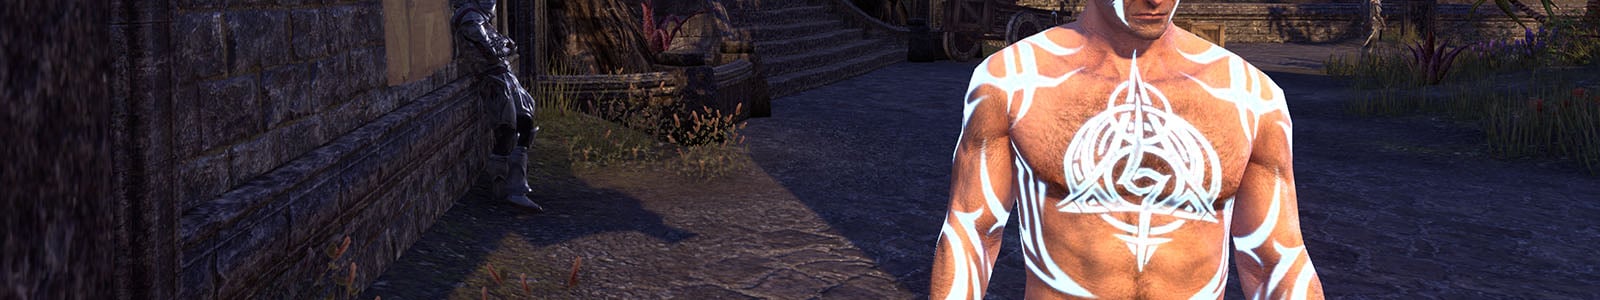 Ink Pendant Neck and Arms - ESO header